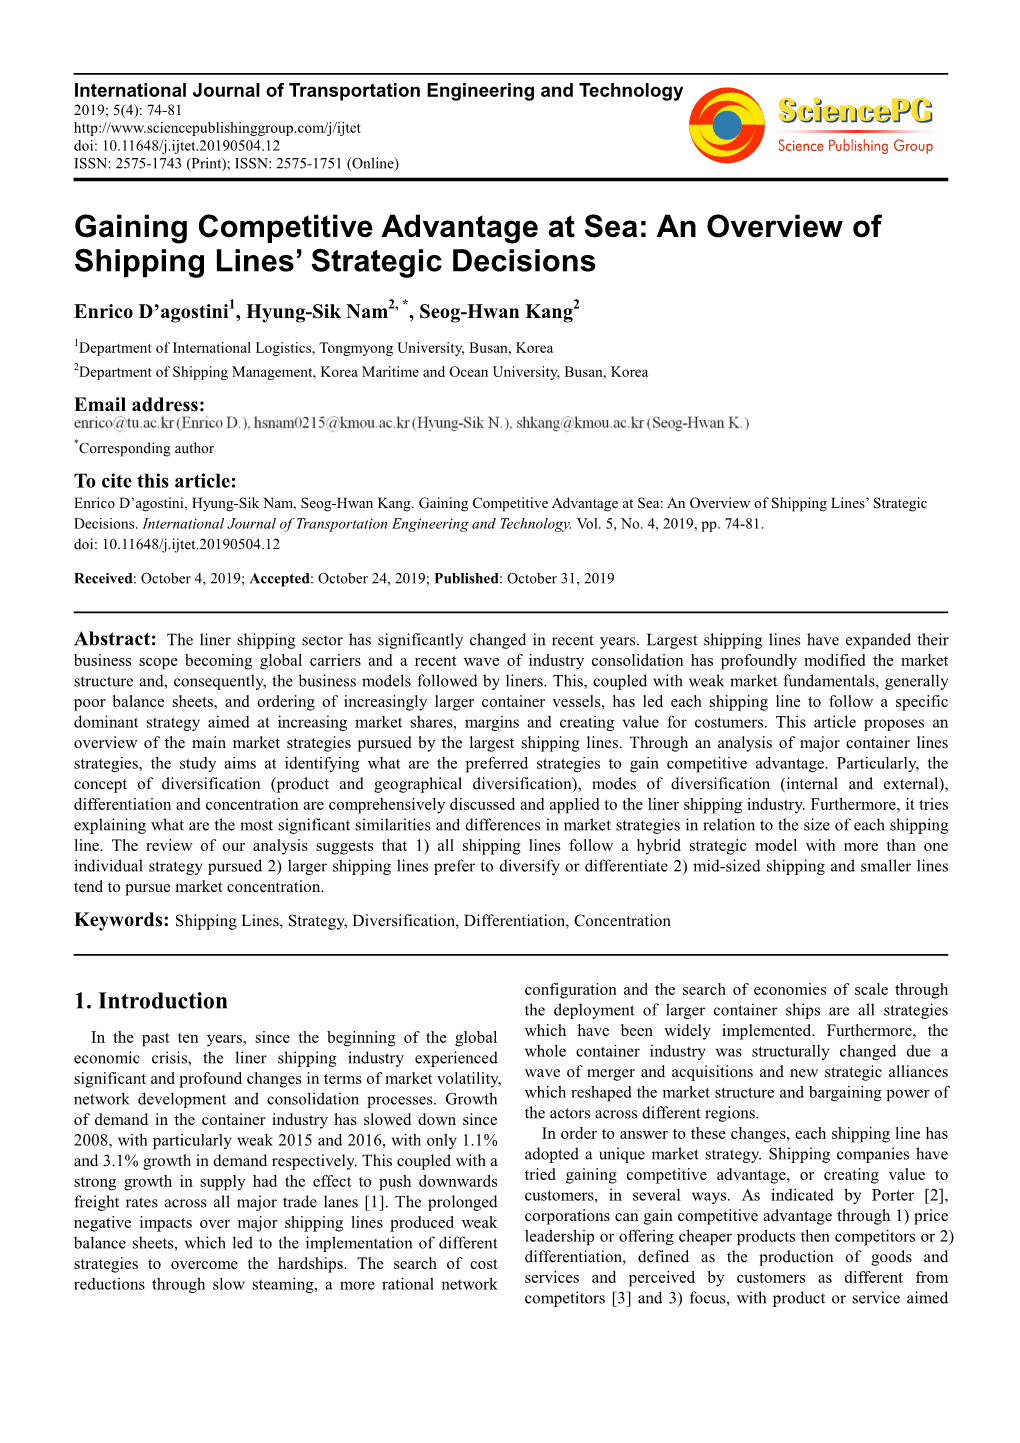 Gaining Competitive Advantage at Sea: an Overview of Shipping Lines’ Strategic Decisions